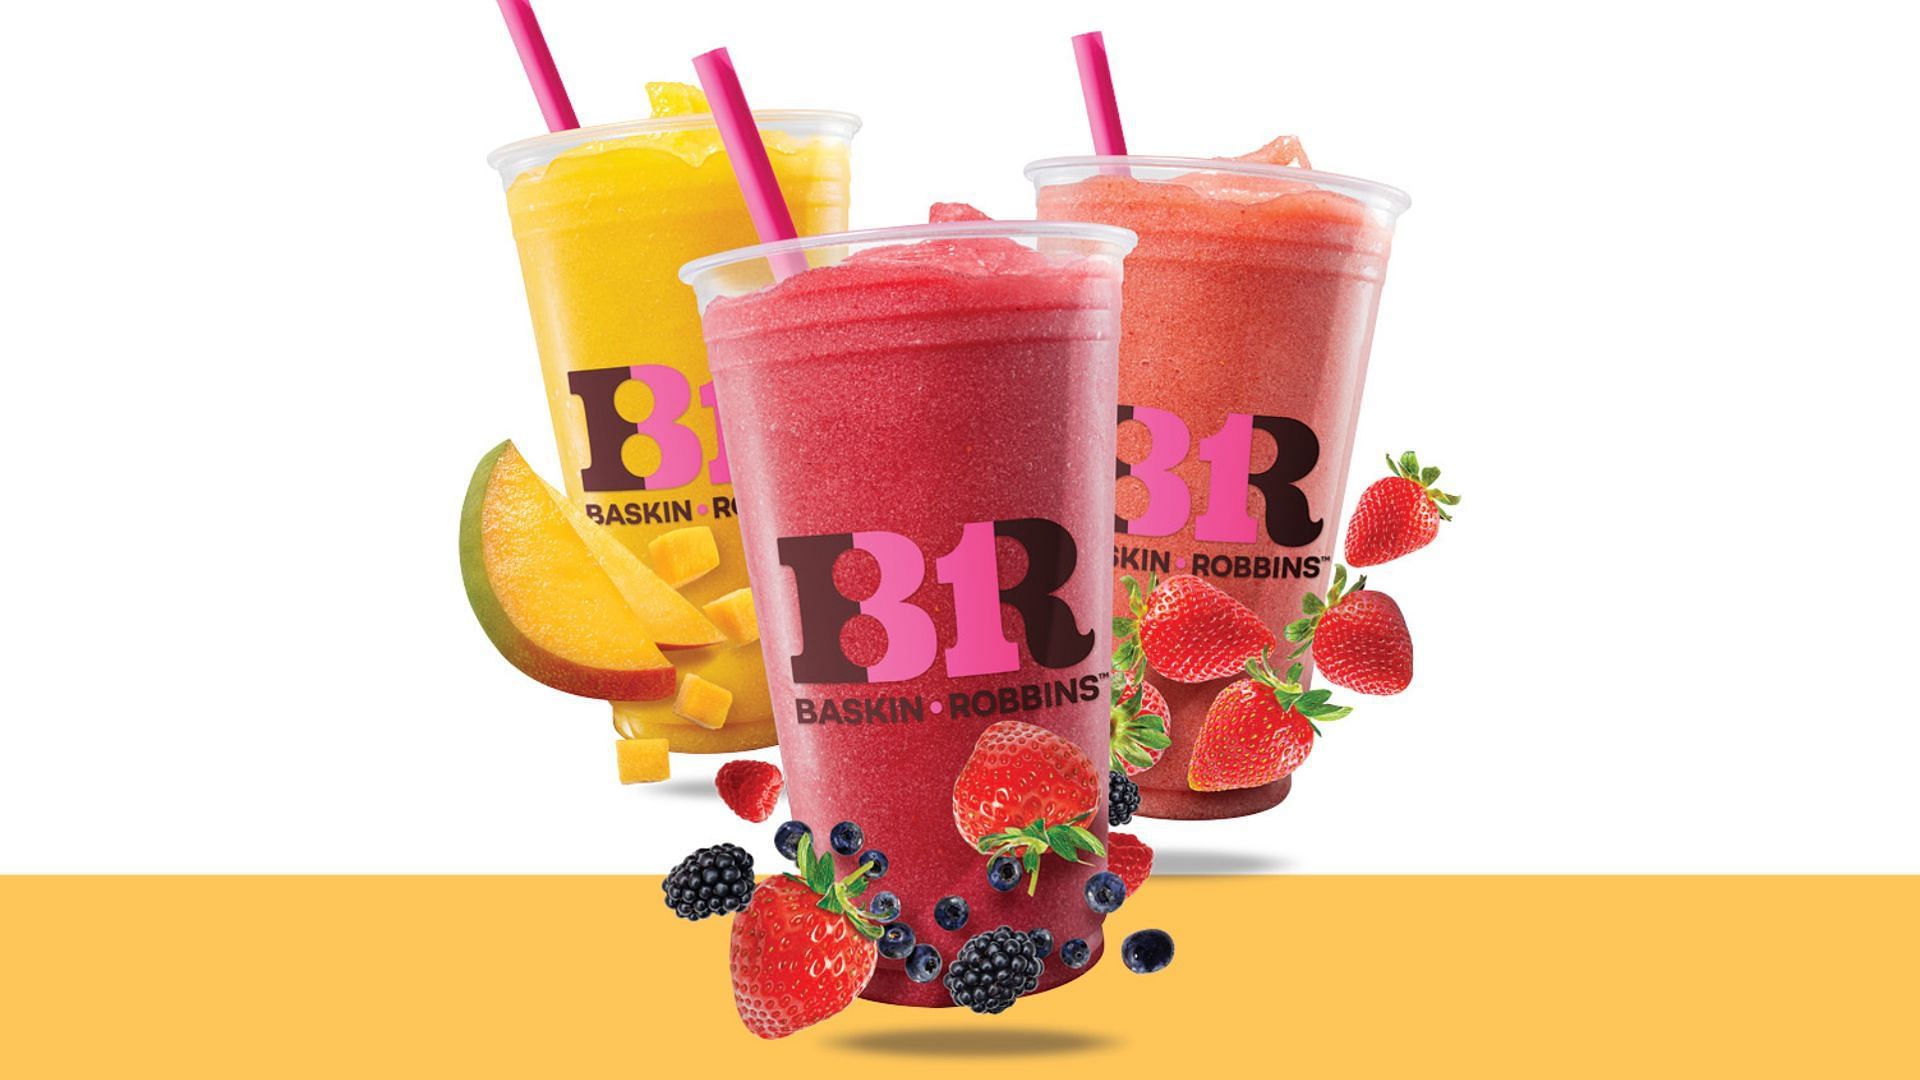 Mixed Berry flavor, Zesty Strawberry flavor, and Tropic Mango flavor non-dairy smoothies (Image via Baskin Robbins)